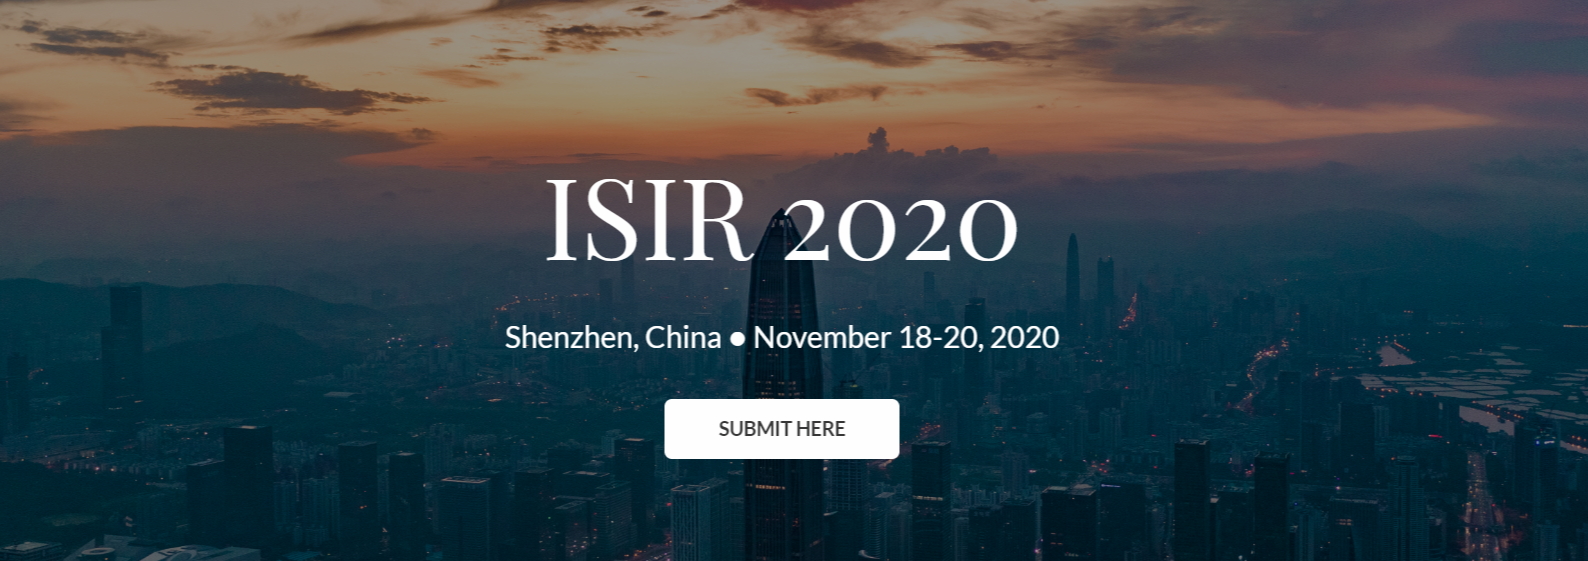 2020 International Conference on Information Security and Information Retrieval-ISIR 2020, Shenzhen, Guangdong, China